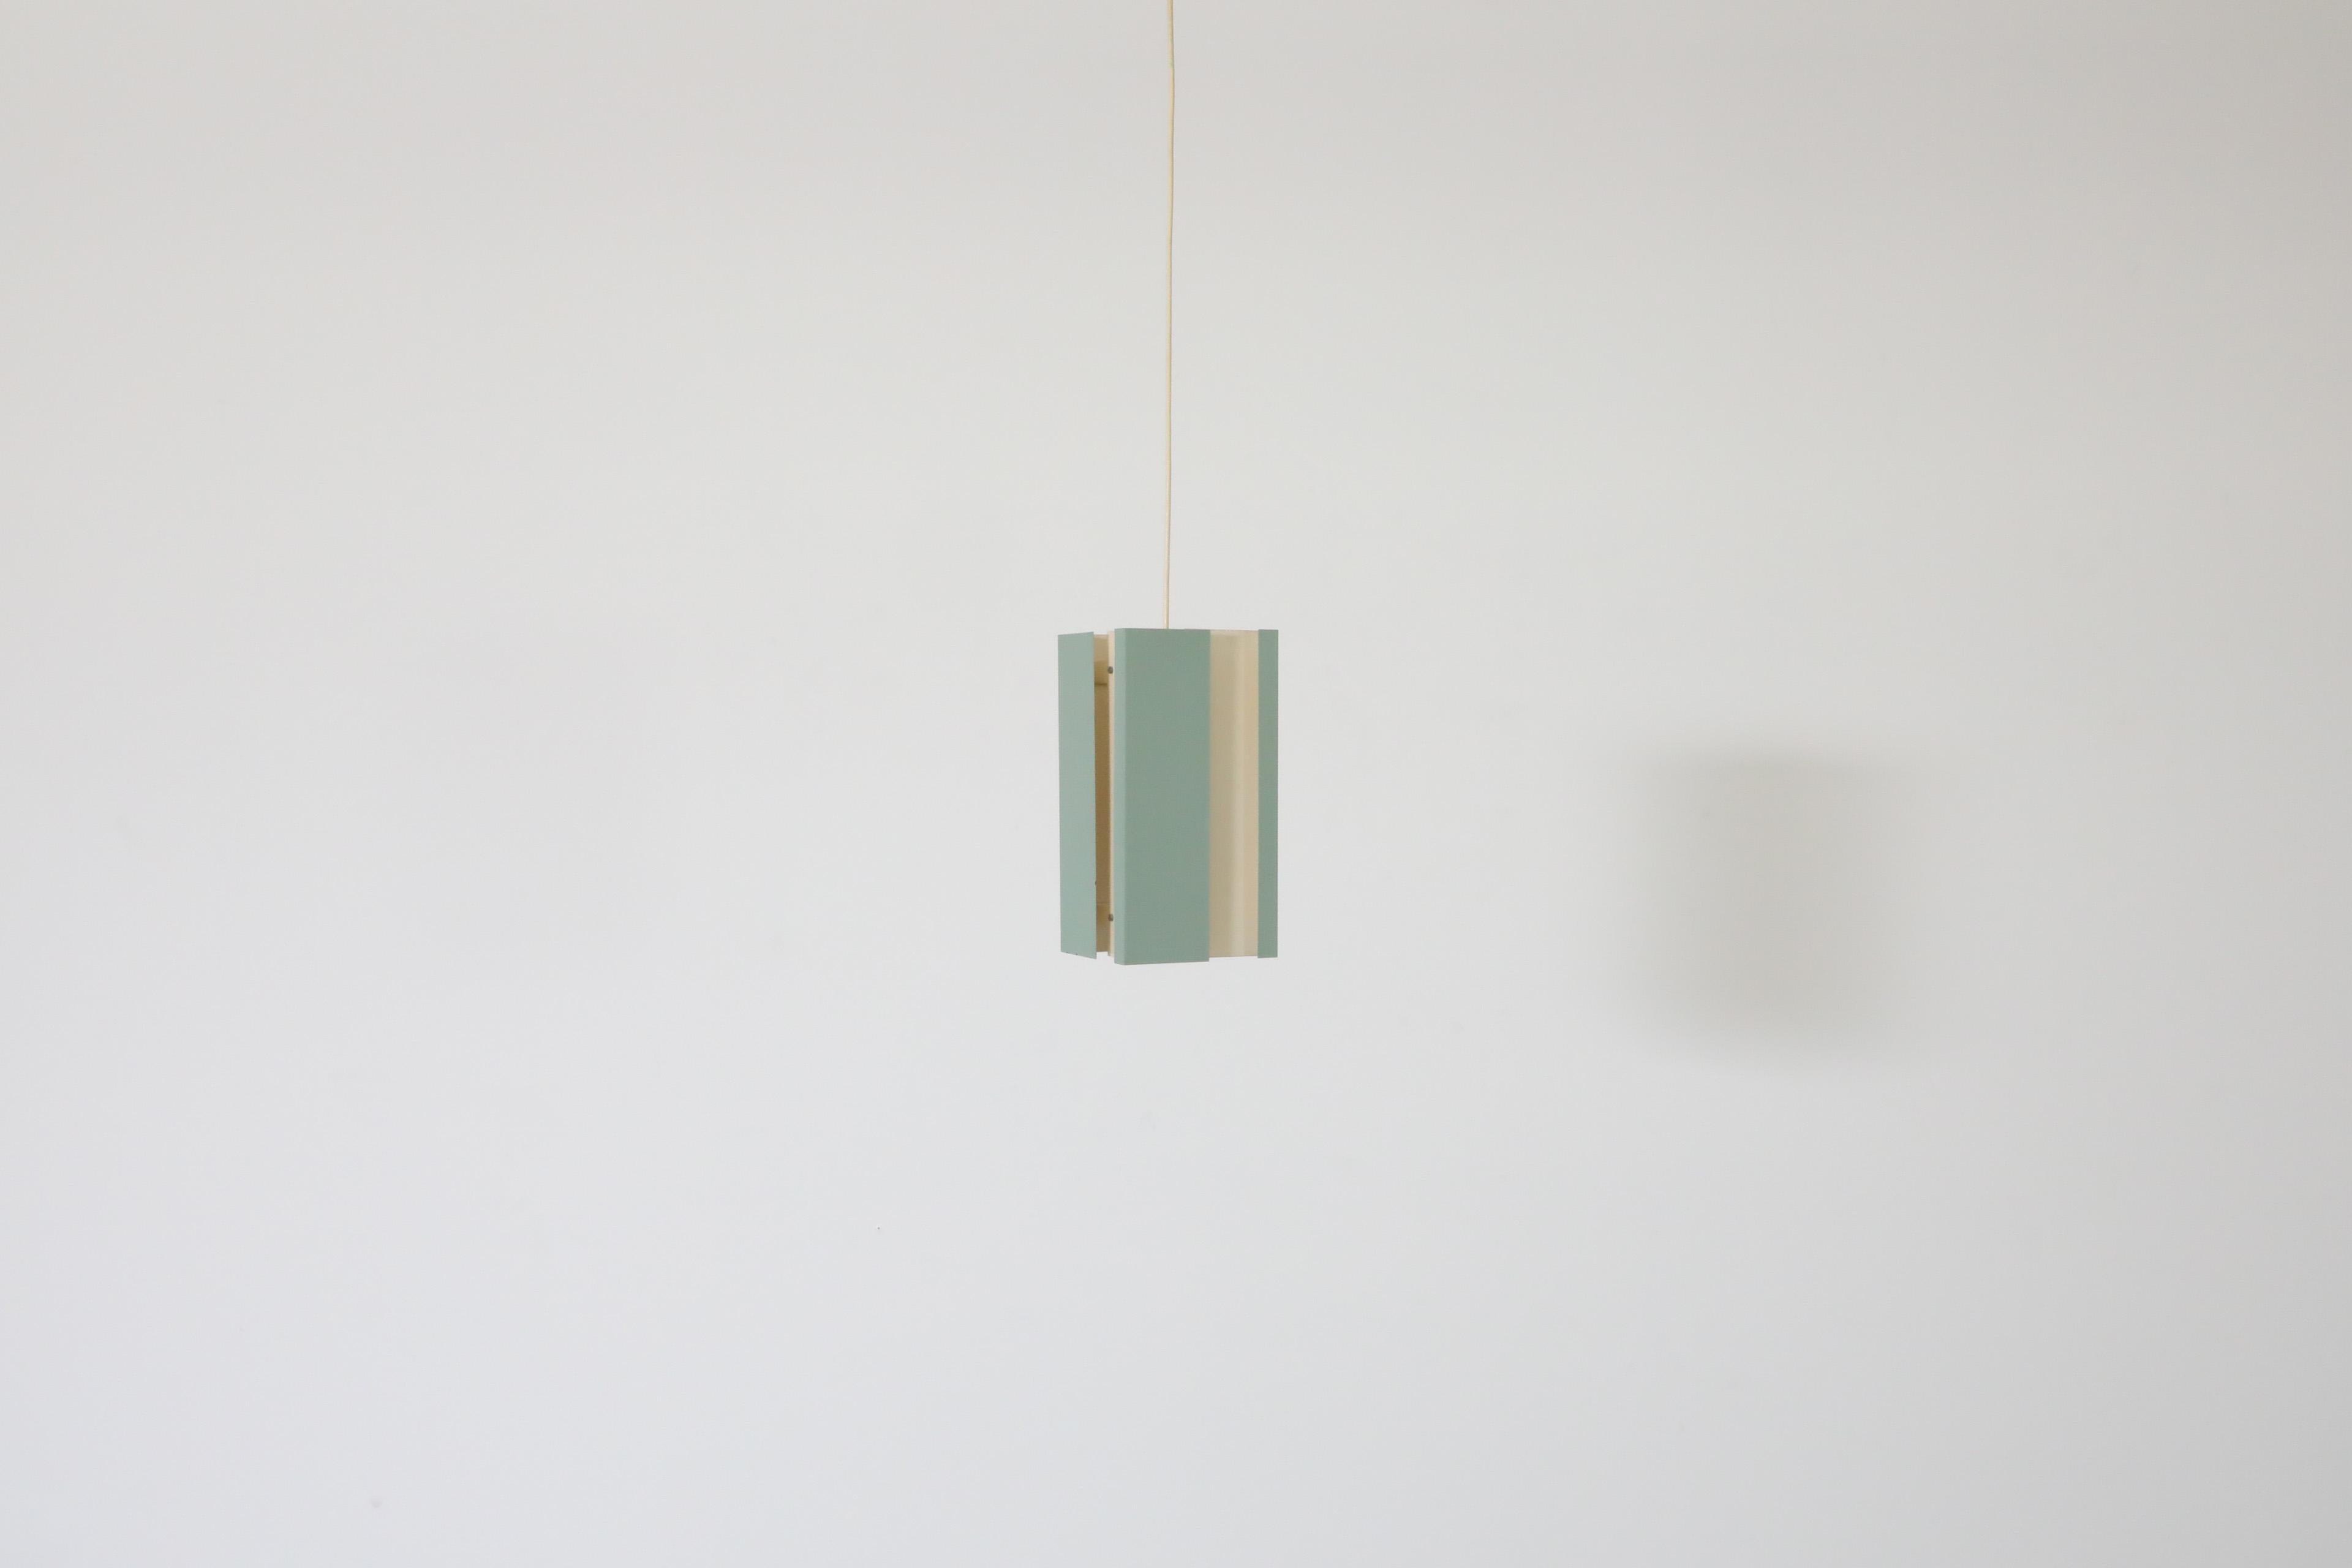 Mid-century 'Model 4101' Pendant light by J.J.M. Hoogervorst for Dutch lighting manufacturer Anvia in white and aqua colored enameled metal ceiling pendant with geometric design. Comes with a European white plastic canopy. In vintage condition with